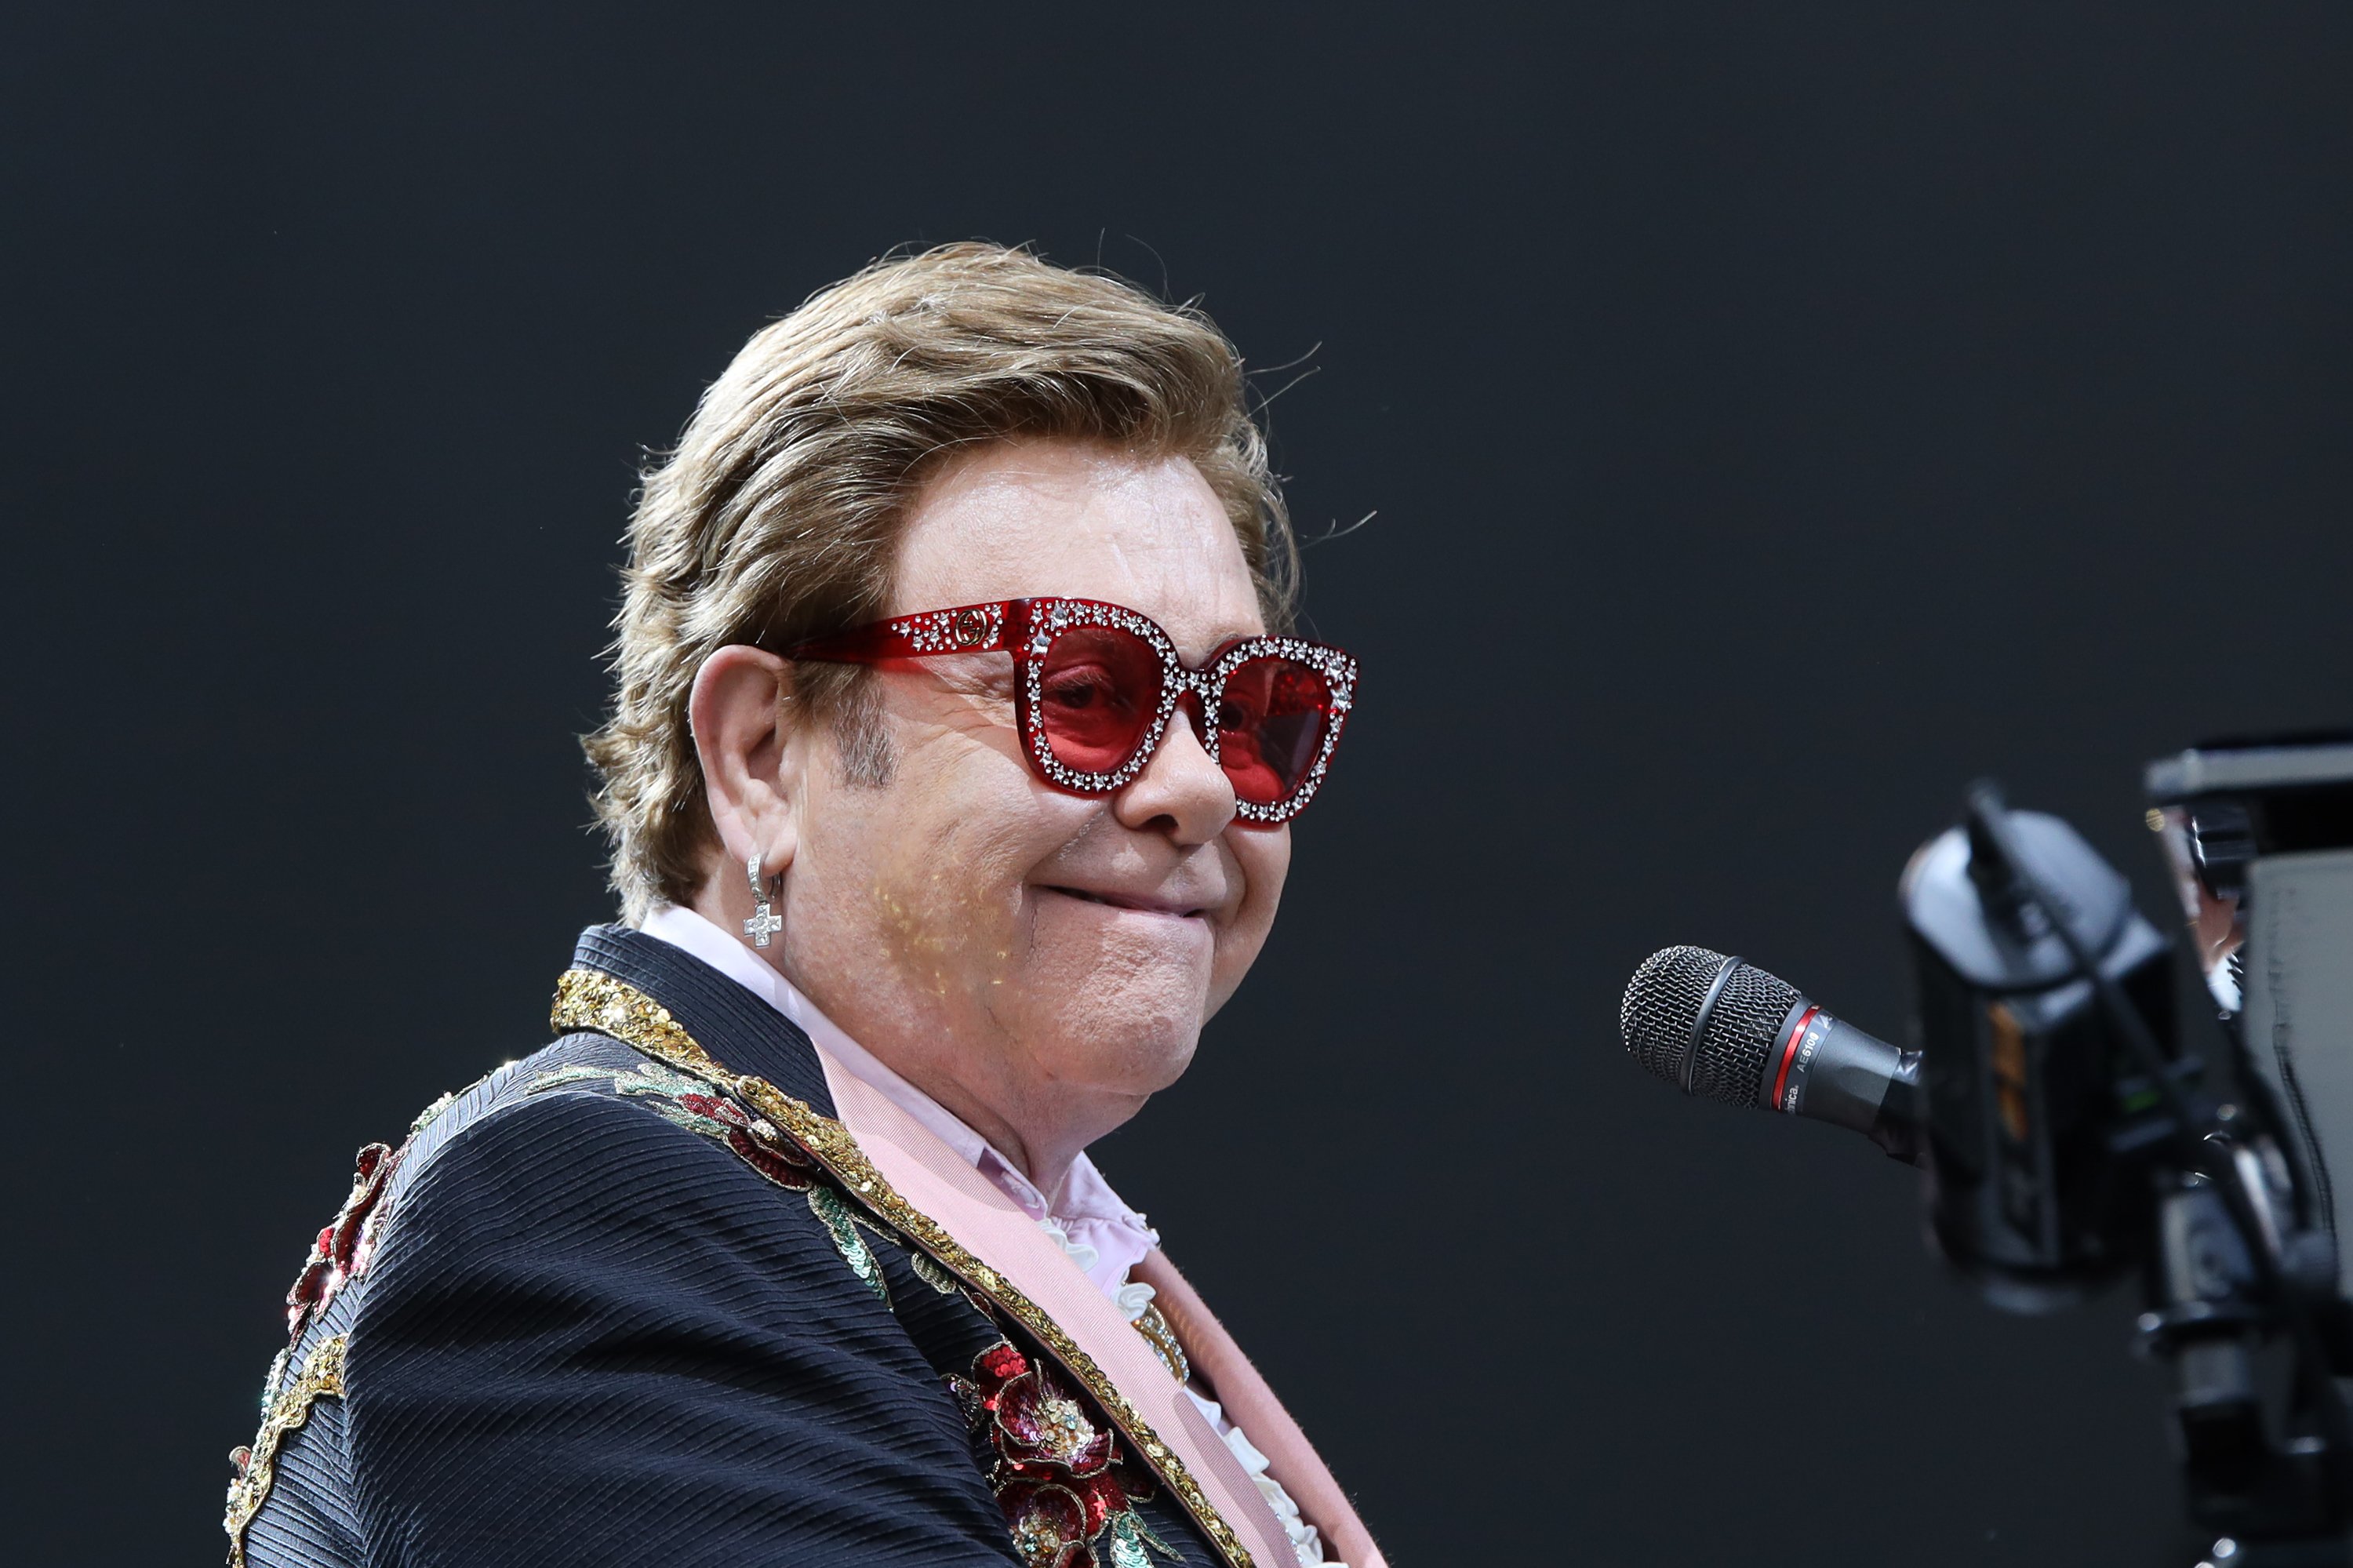 Sir Elton John performing at Mt Smart Stadium right before walking off stage on February 16, 2020 in Auckland, New Zealand | Photo: Dave Simpson/WireImage